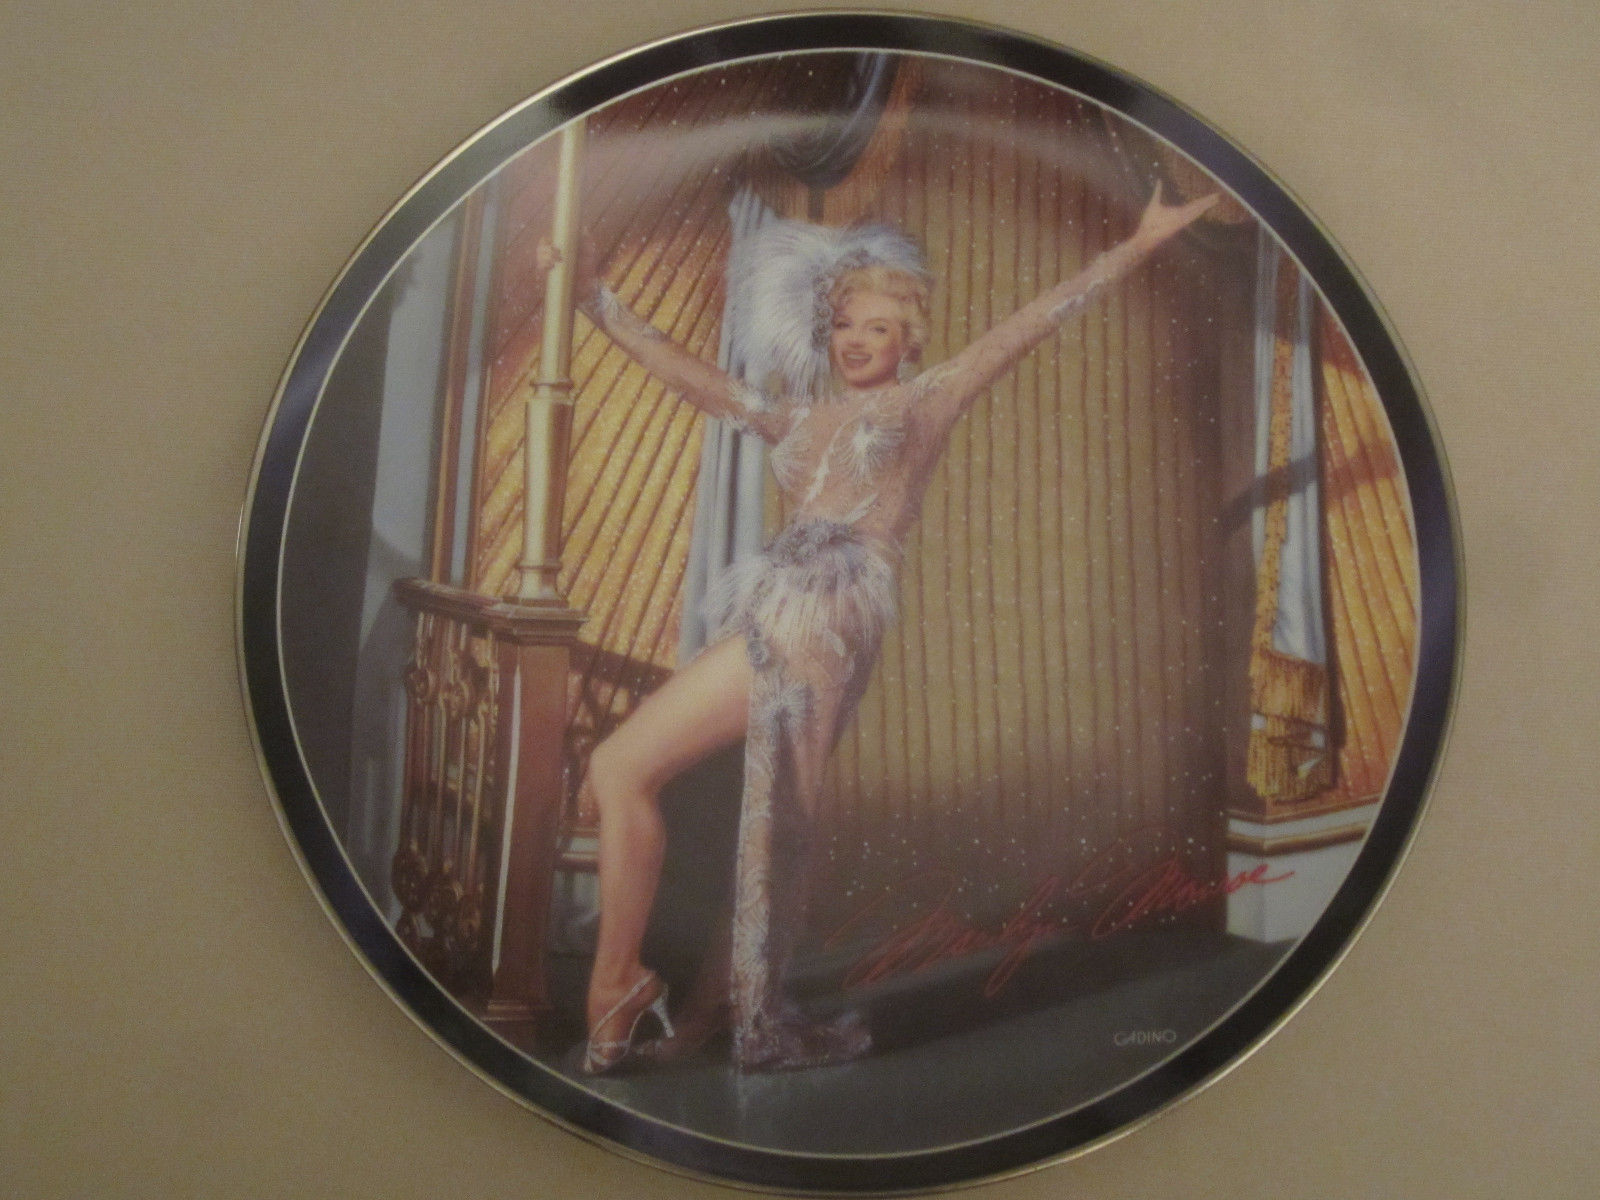 Primary image for MARILYN MONROE collector plate EVERYTHING ABOUT IT IS APPEALING Silver Screen #3